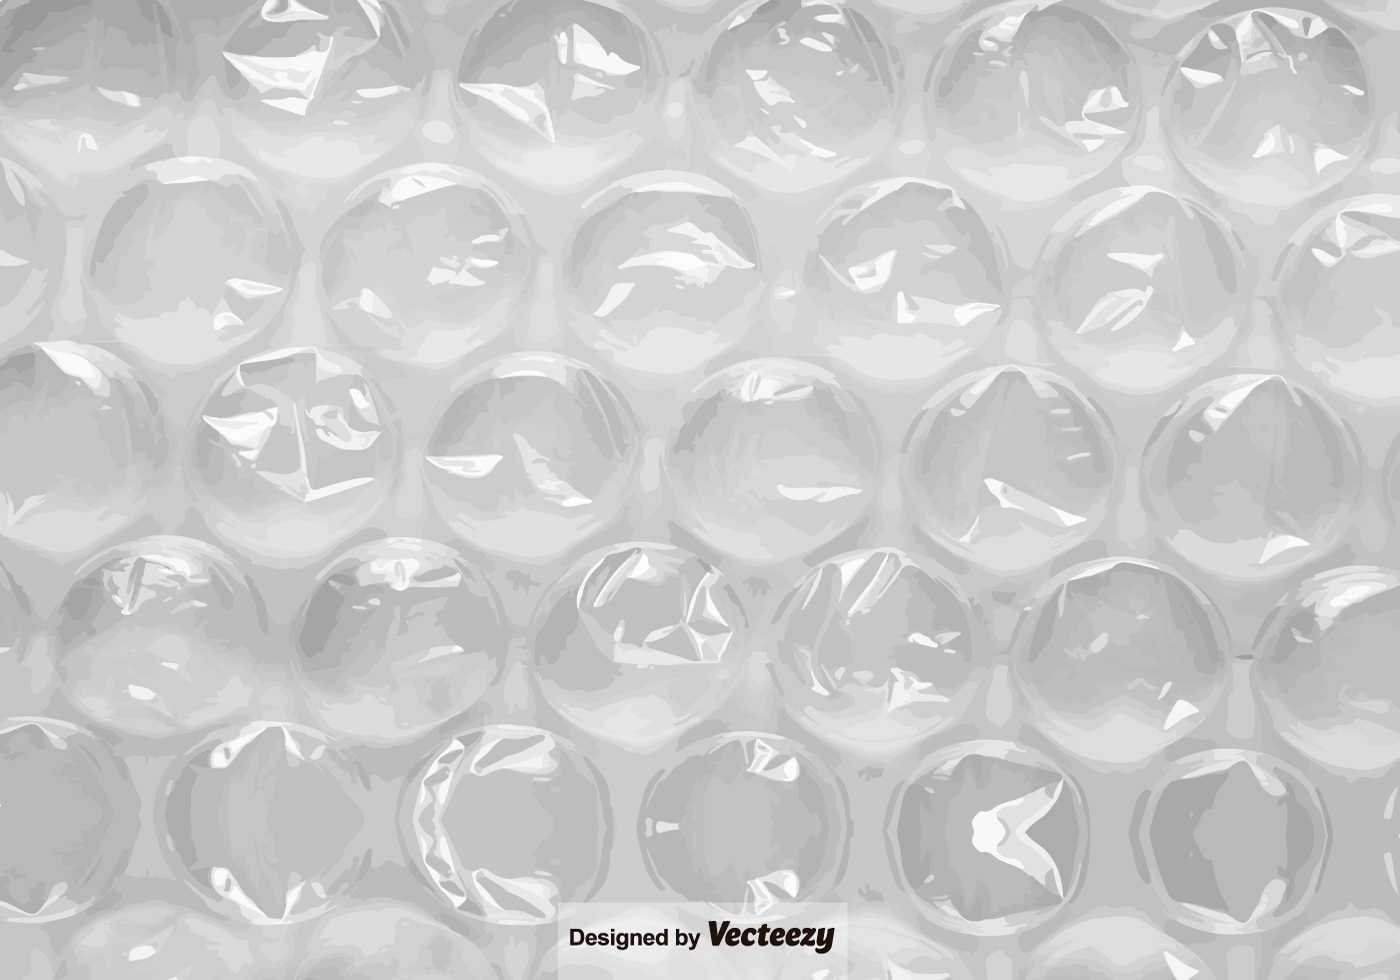 Bubble Wrap Vector Background - Download Free Vector Art, Stock